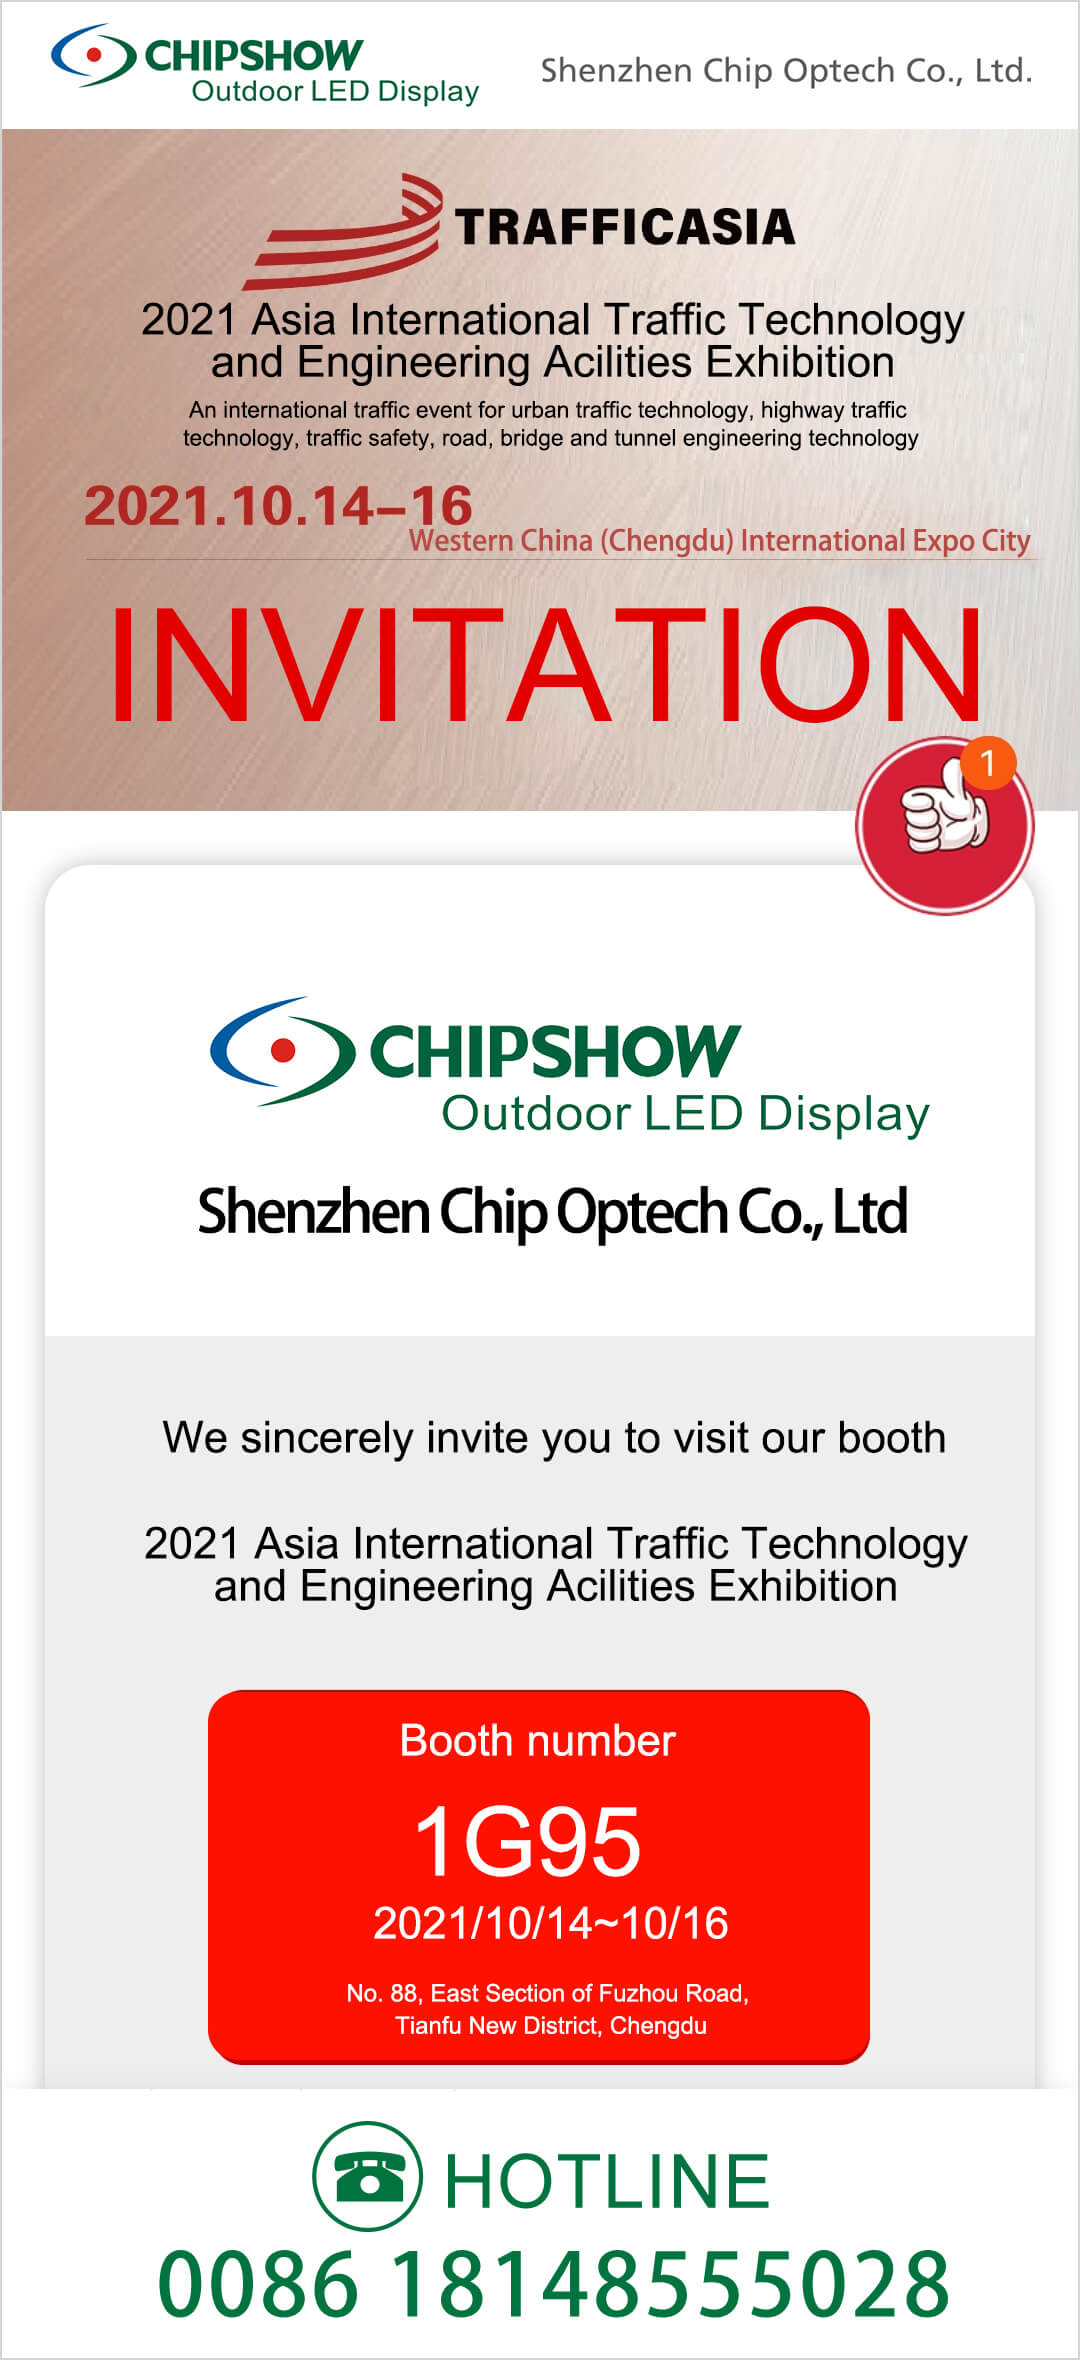 Chipshow will participate in TRAFFIC ASIA 2021